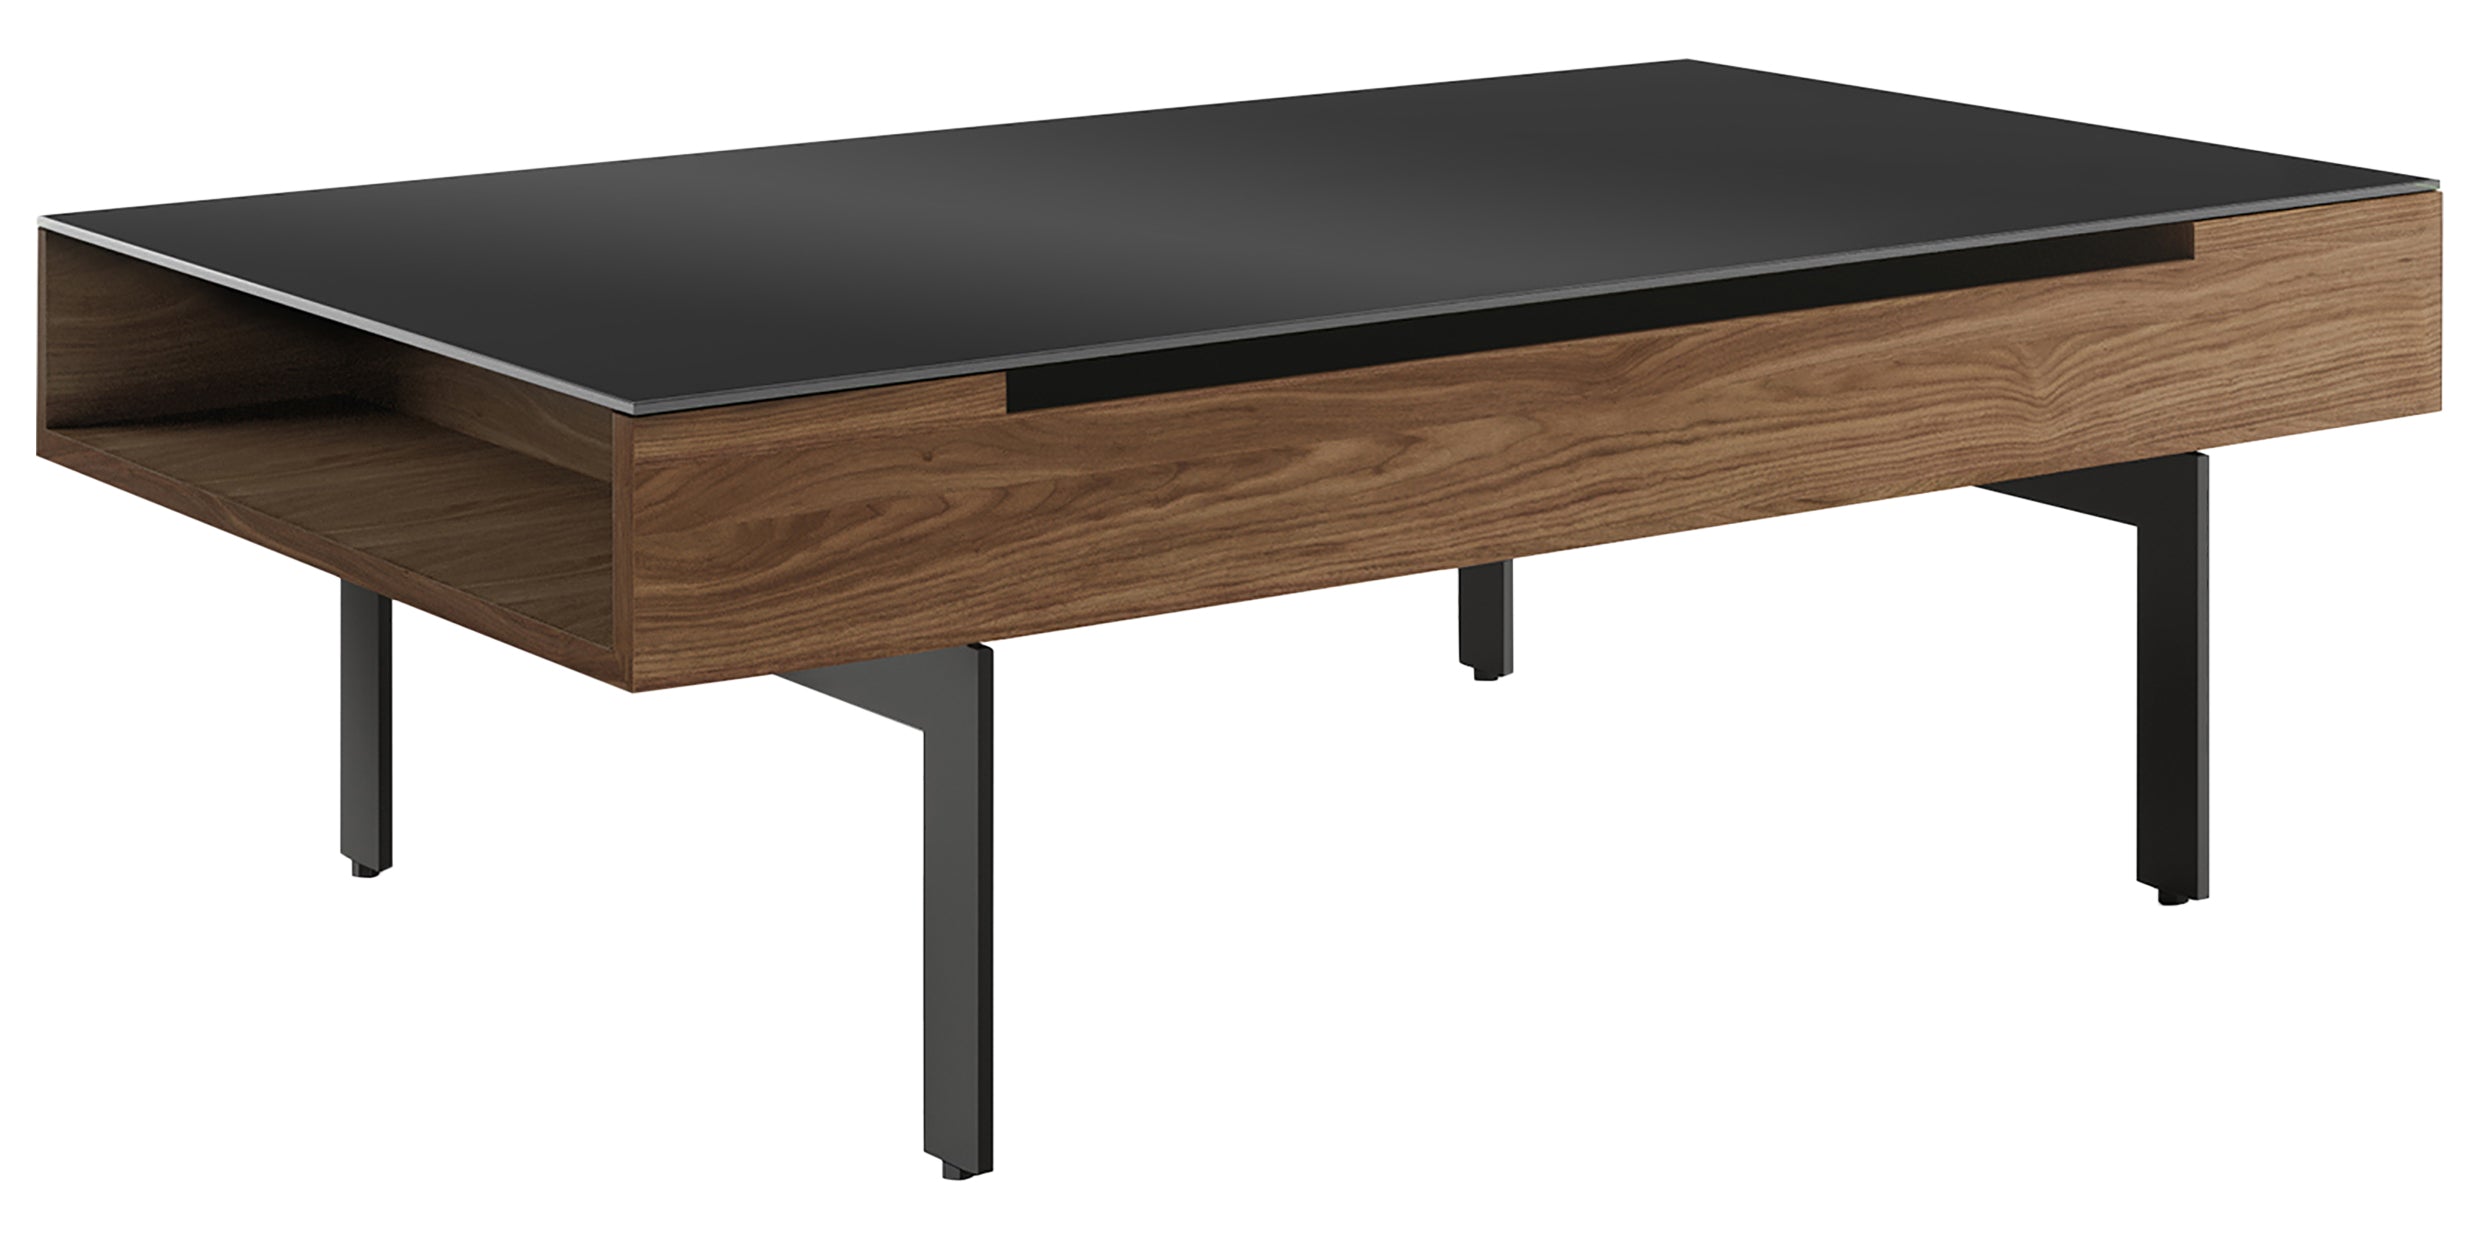 Natural Walnut Veneer &amp; Black Satin-Etched Glass with Black Steel | BDI Reveal Lift Coffee Table | Valley Ridge Furniture